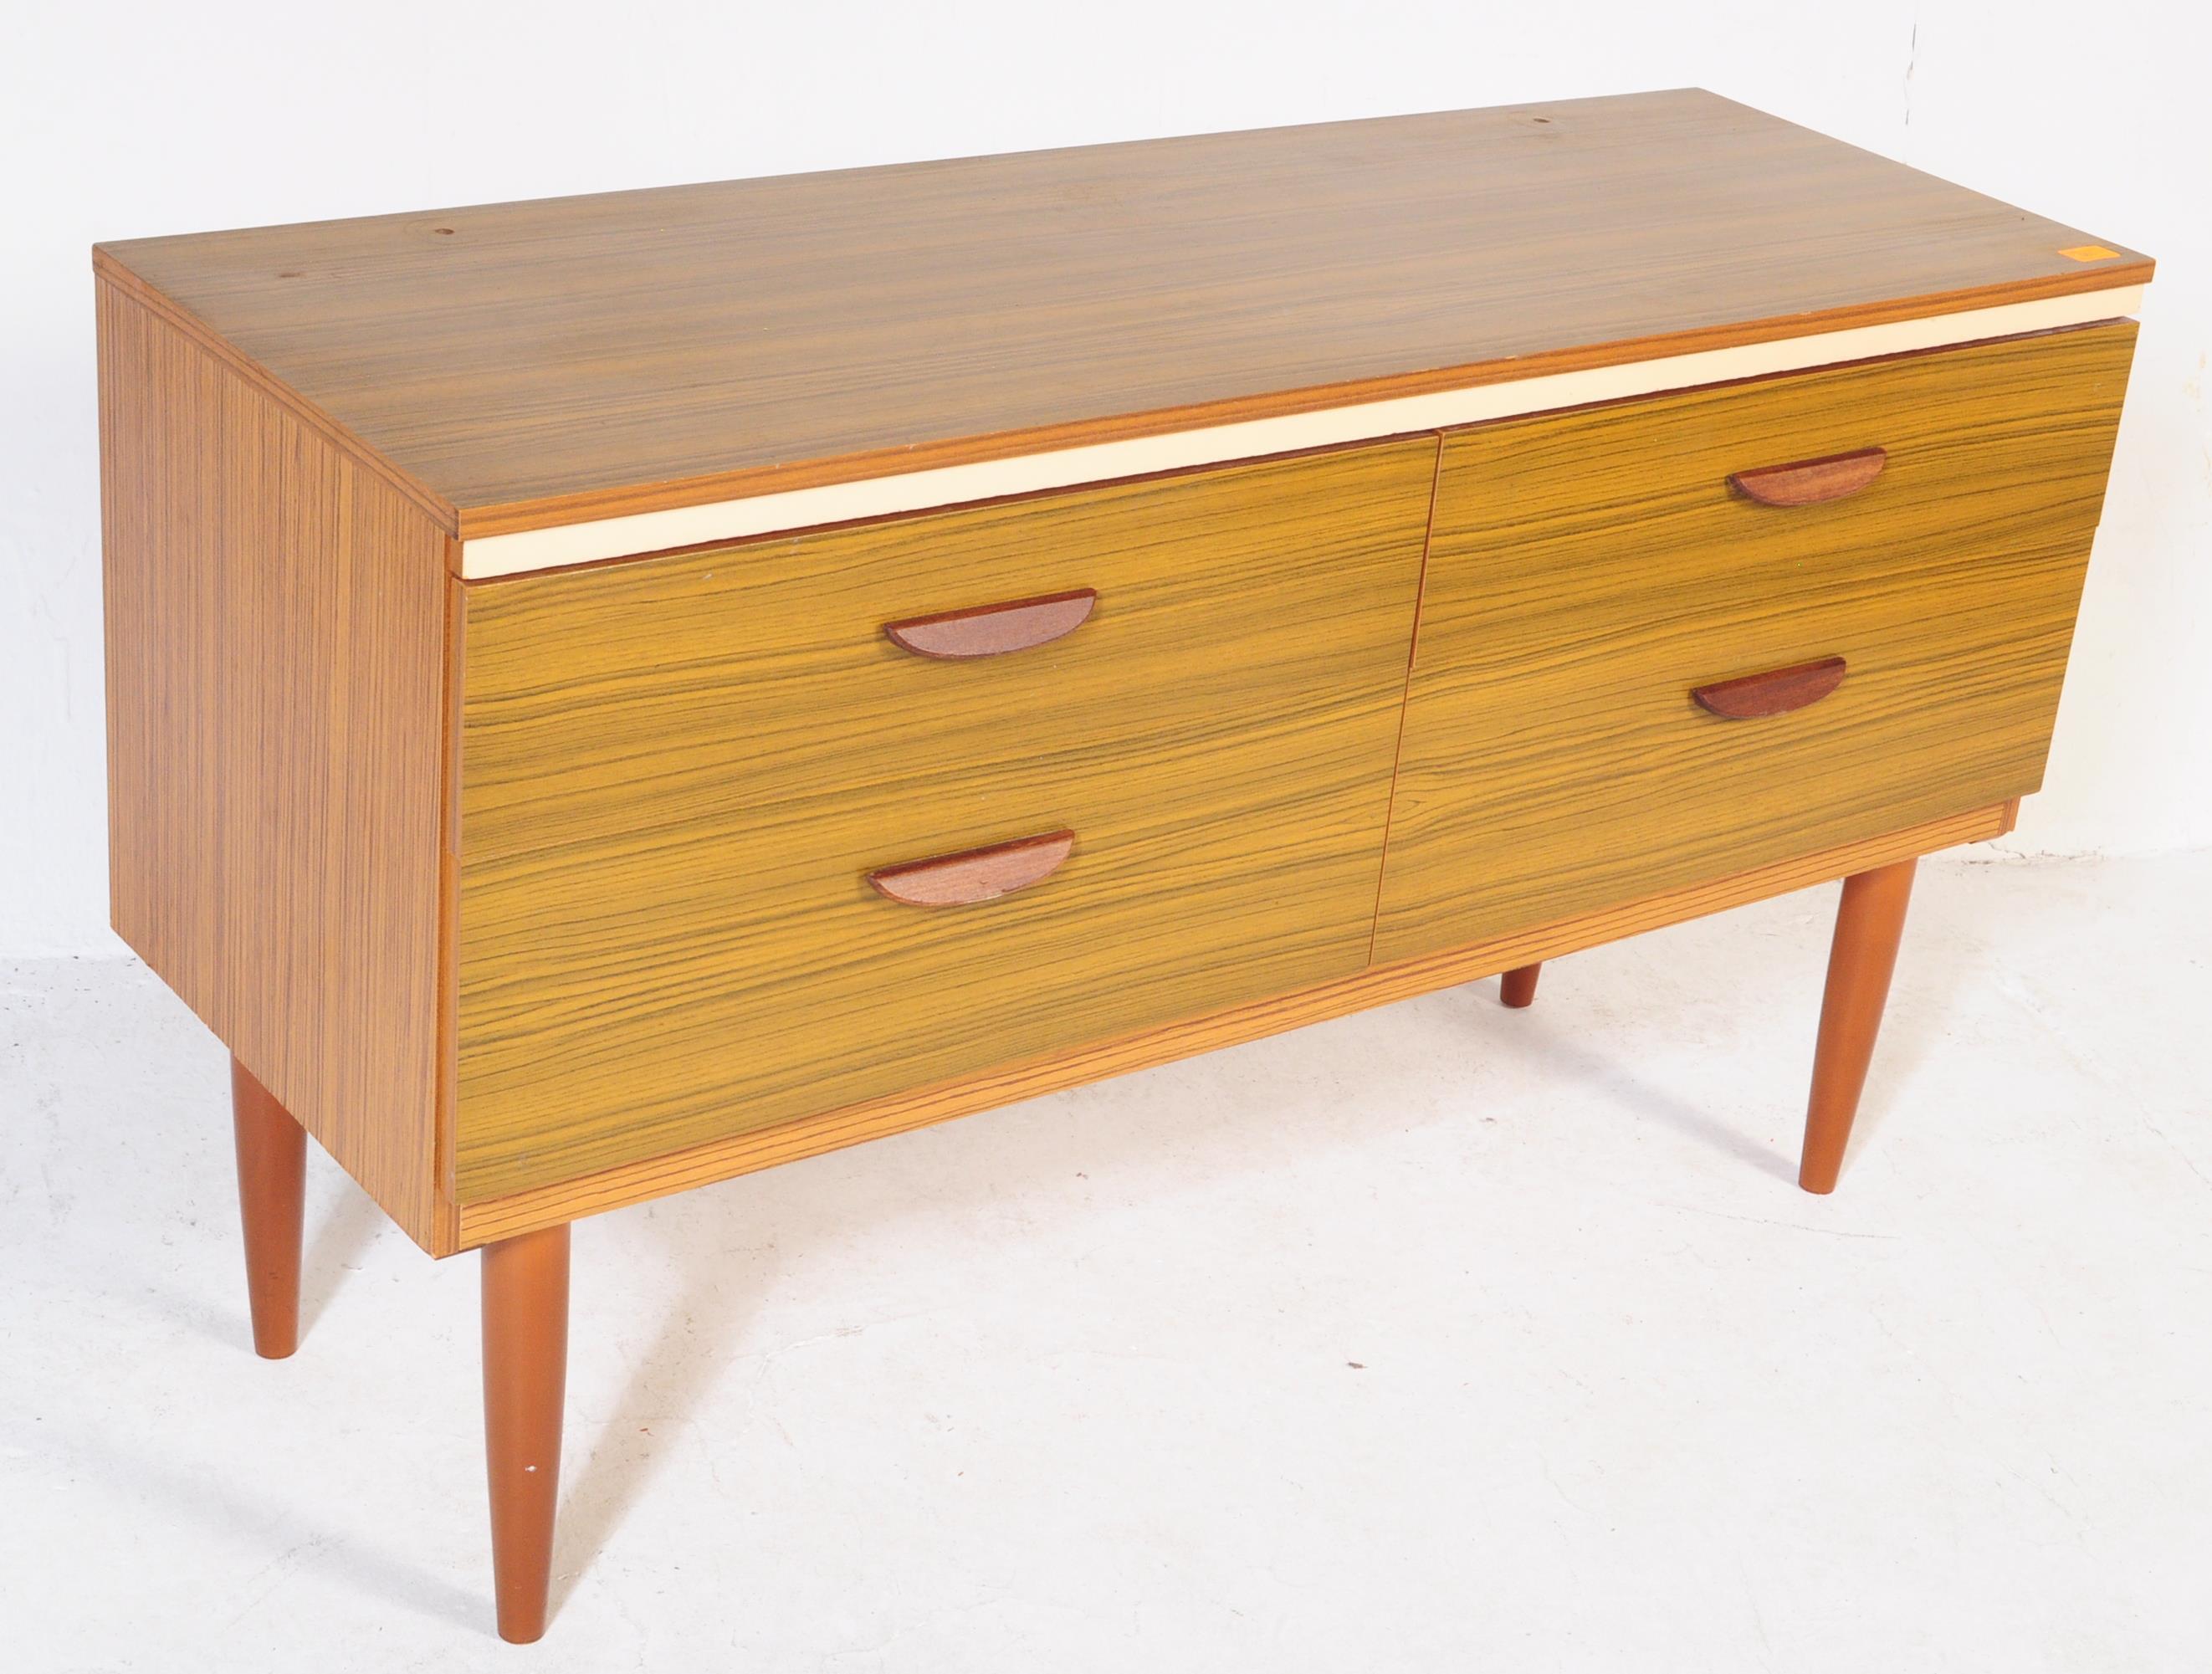 RETRO MID CENTURY 1960S FORMICA SIDEBOARD - Image 2 of 5